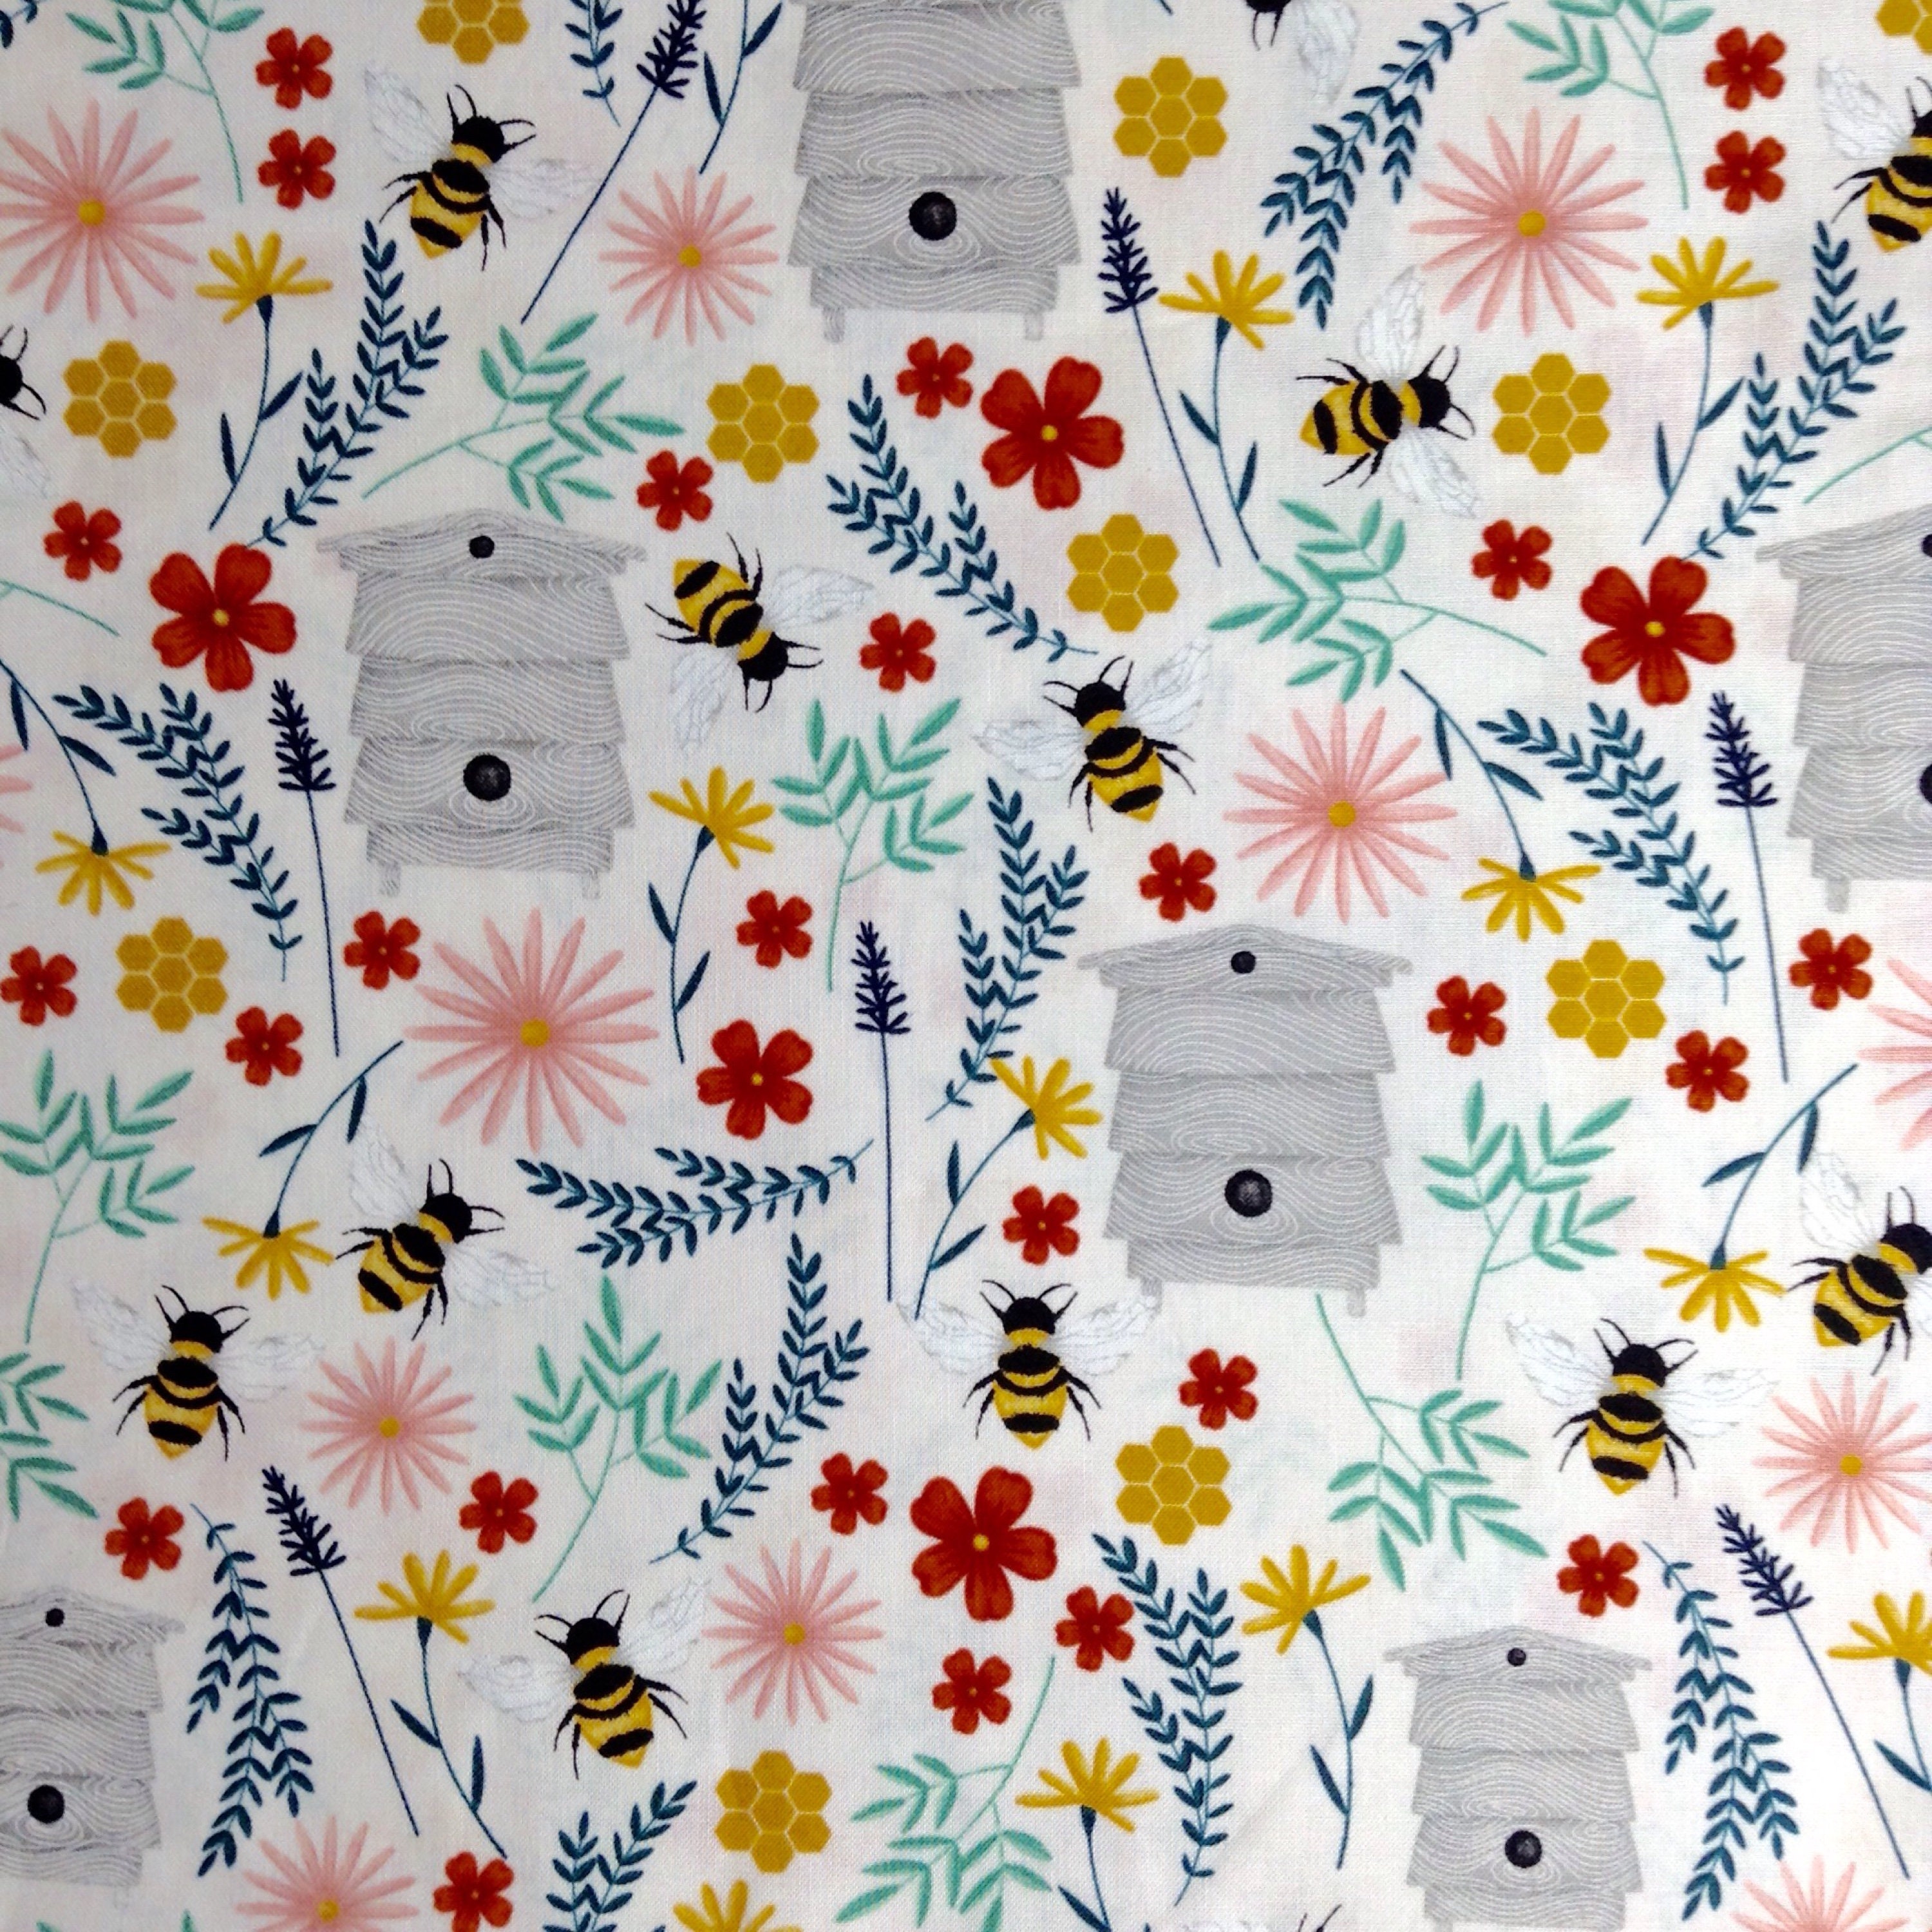 Fabric by the Half Yard Foral Bees on Gray, Garden Bees, Bee Fabric, Bumble Bee  Fabric, Bee Hives, Bumble Bees 